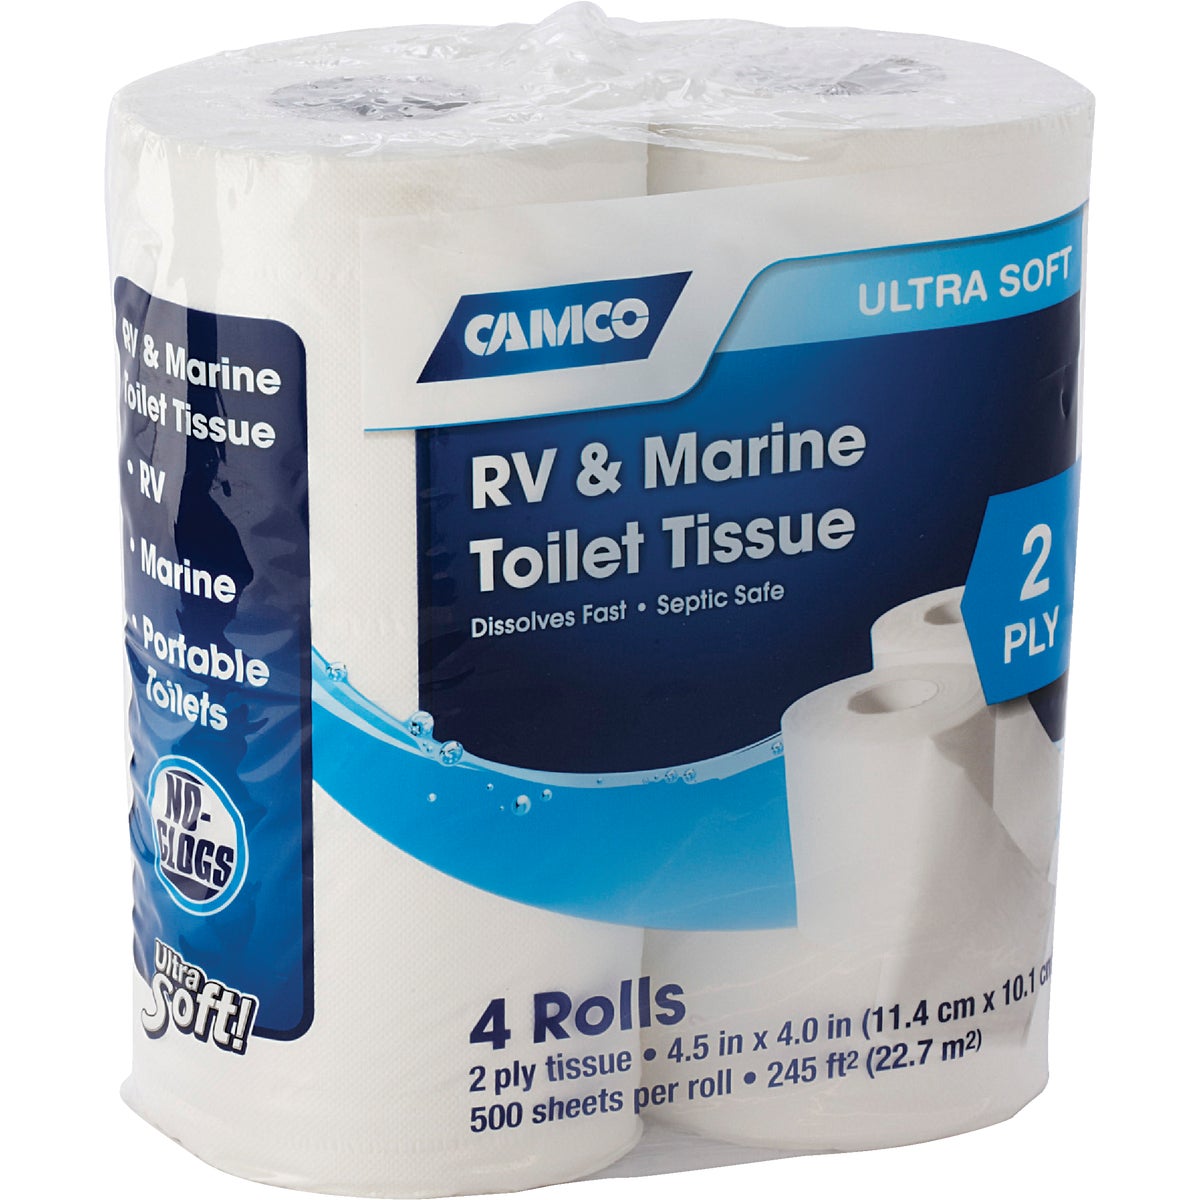 Item 579858, Fast dissolving, clog-resistant toilet tissue is biodegradable and septic 